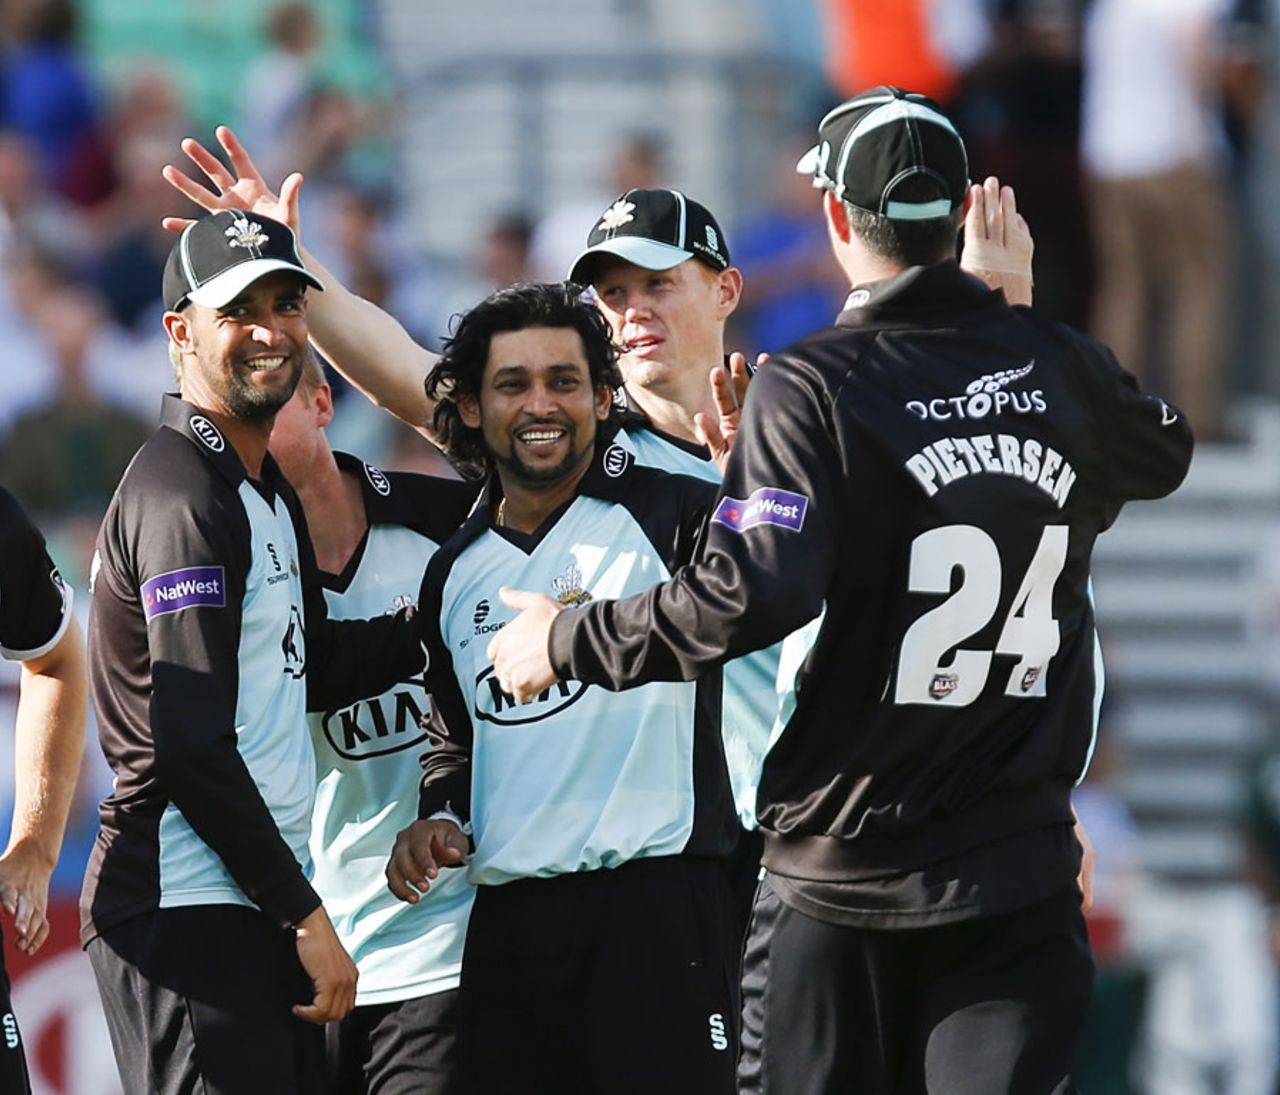 Tillakaratne Dilshan made his first appearance for Surrey, Surrey v Hampshire, NatWest T20 Blast, South Division, The Oval, June 27, 2014